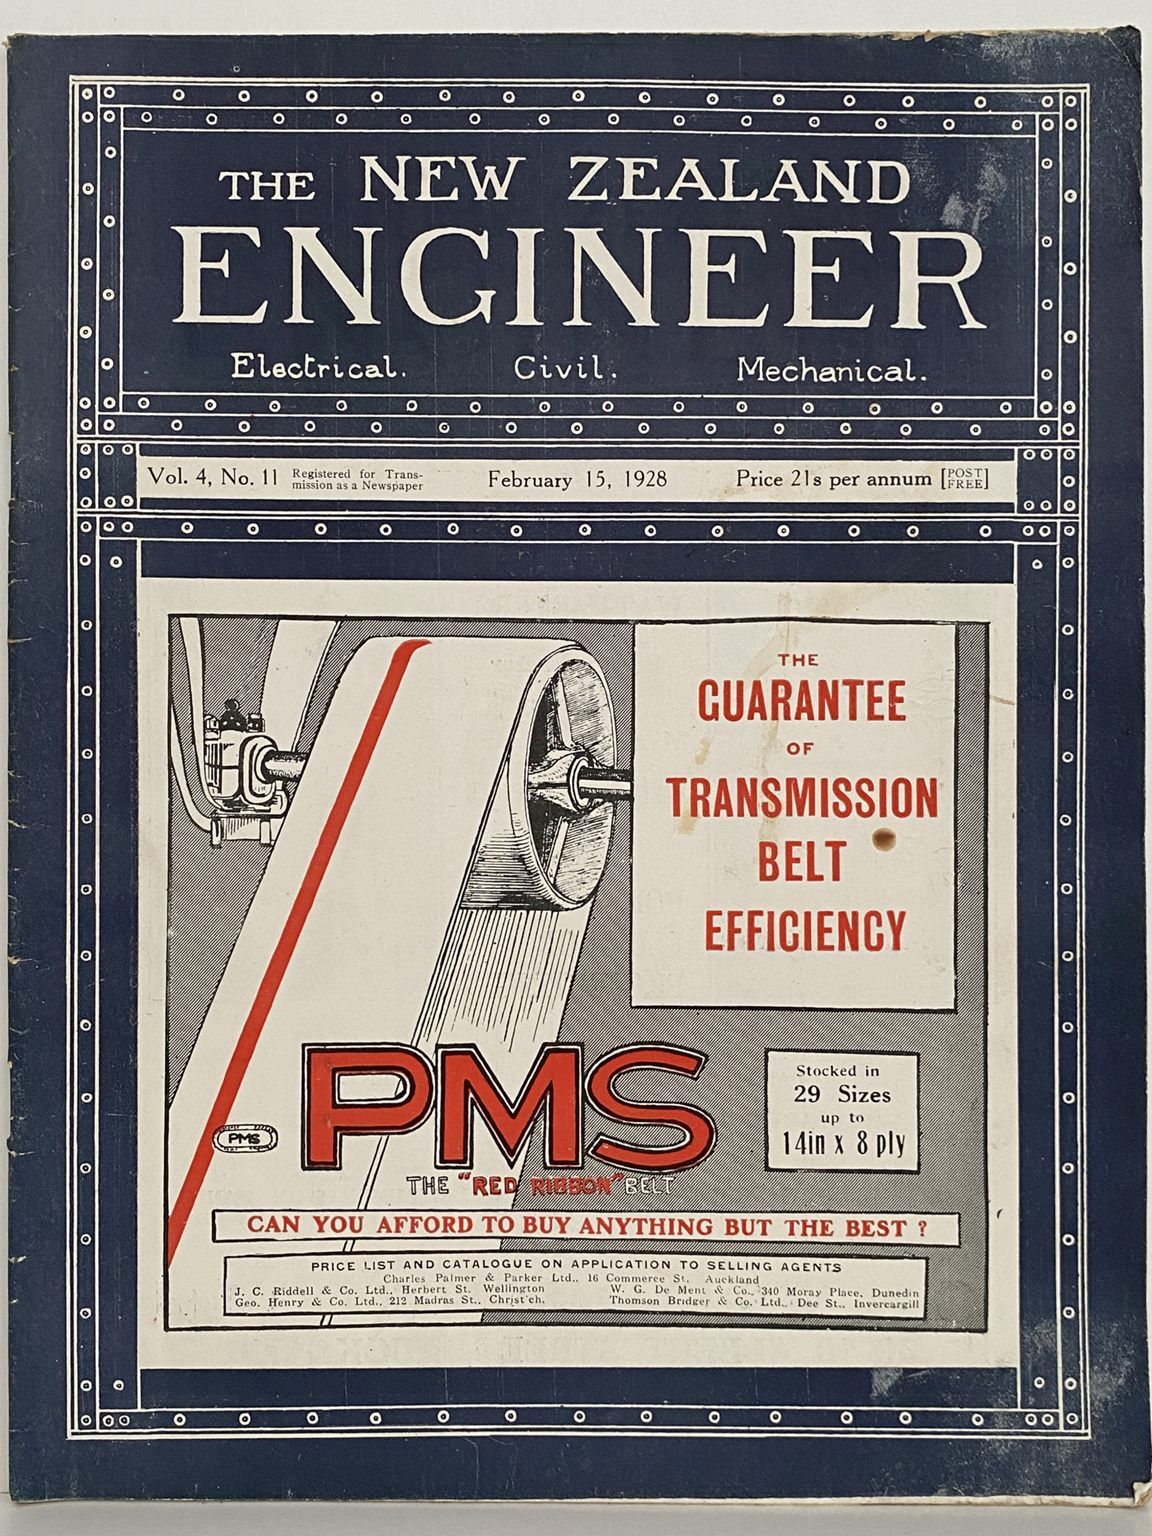 OLD MAGAZINE: The New Zealand Engineer Vol. 4, No. 11 - 15 February 1928